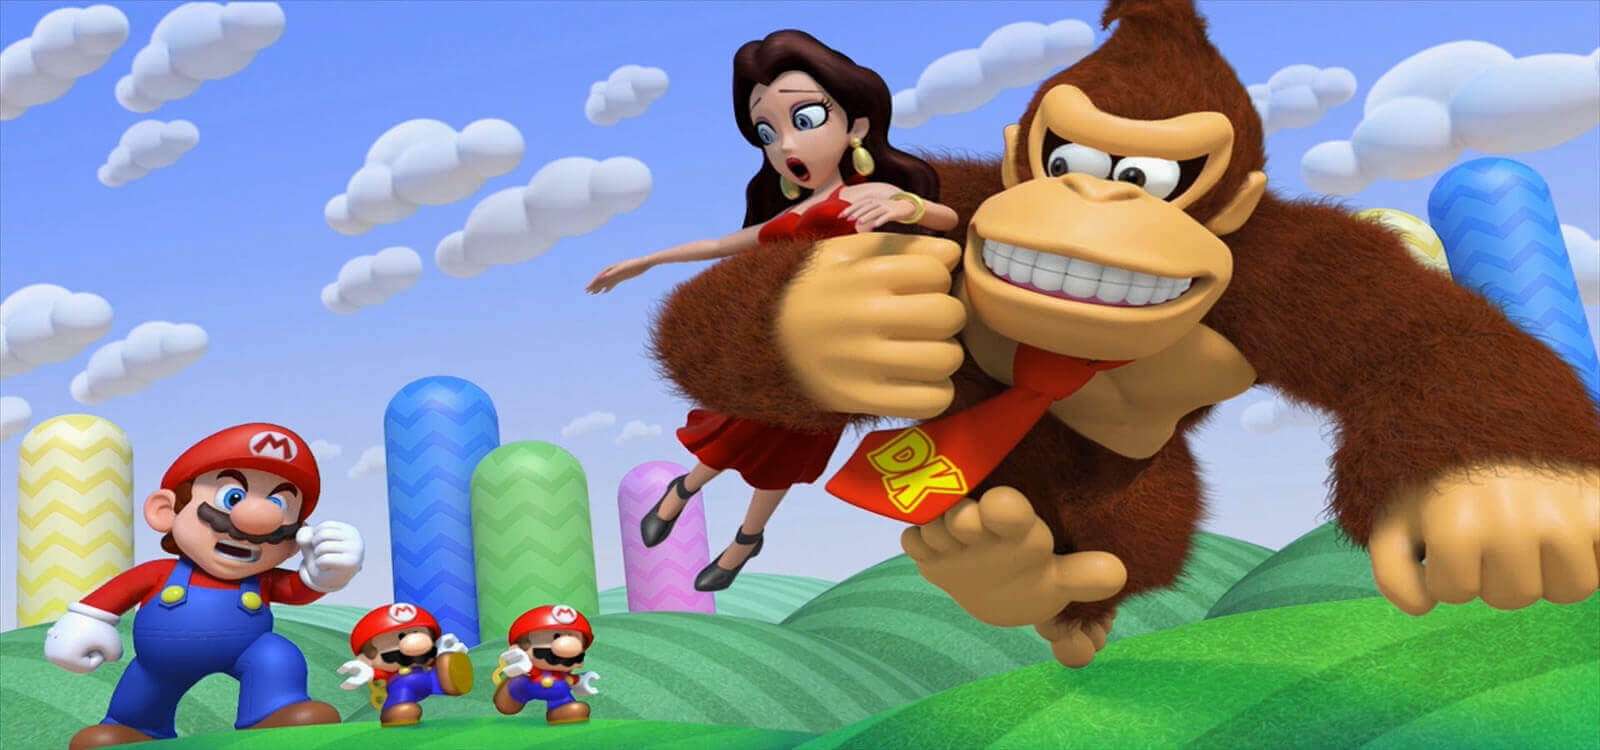 Play Donkey Kong with Mario. Free Flash Game